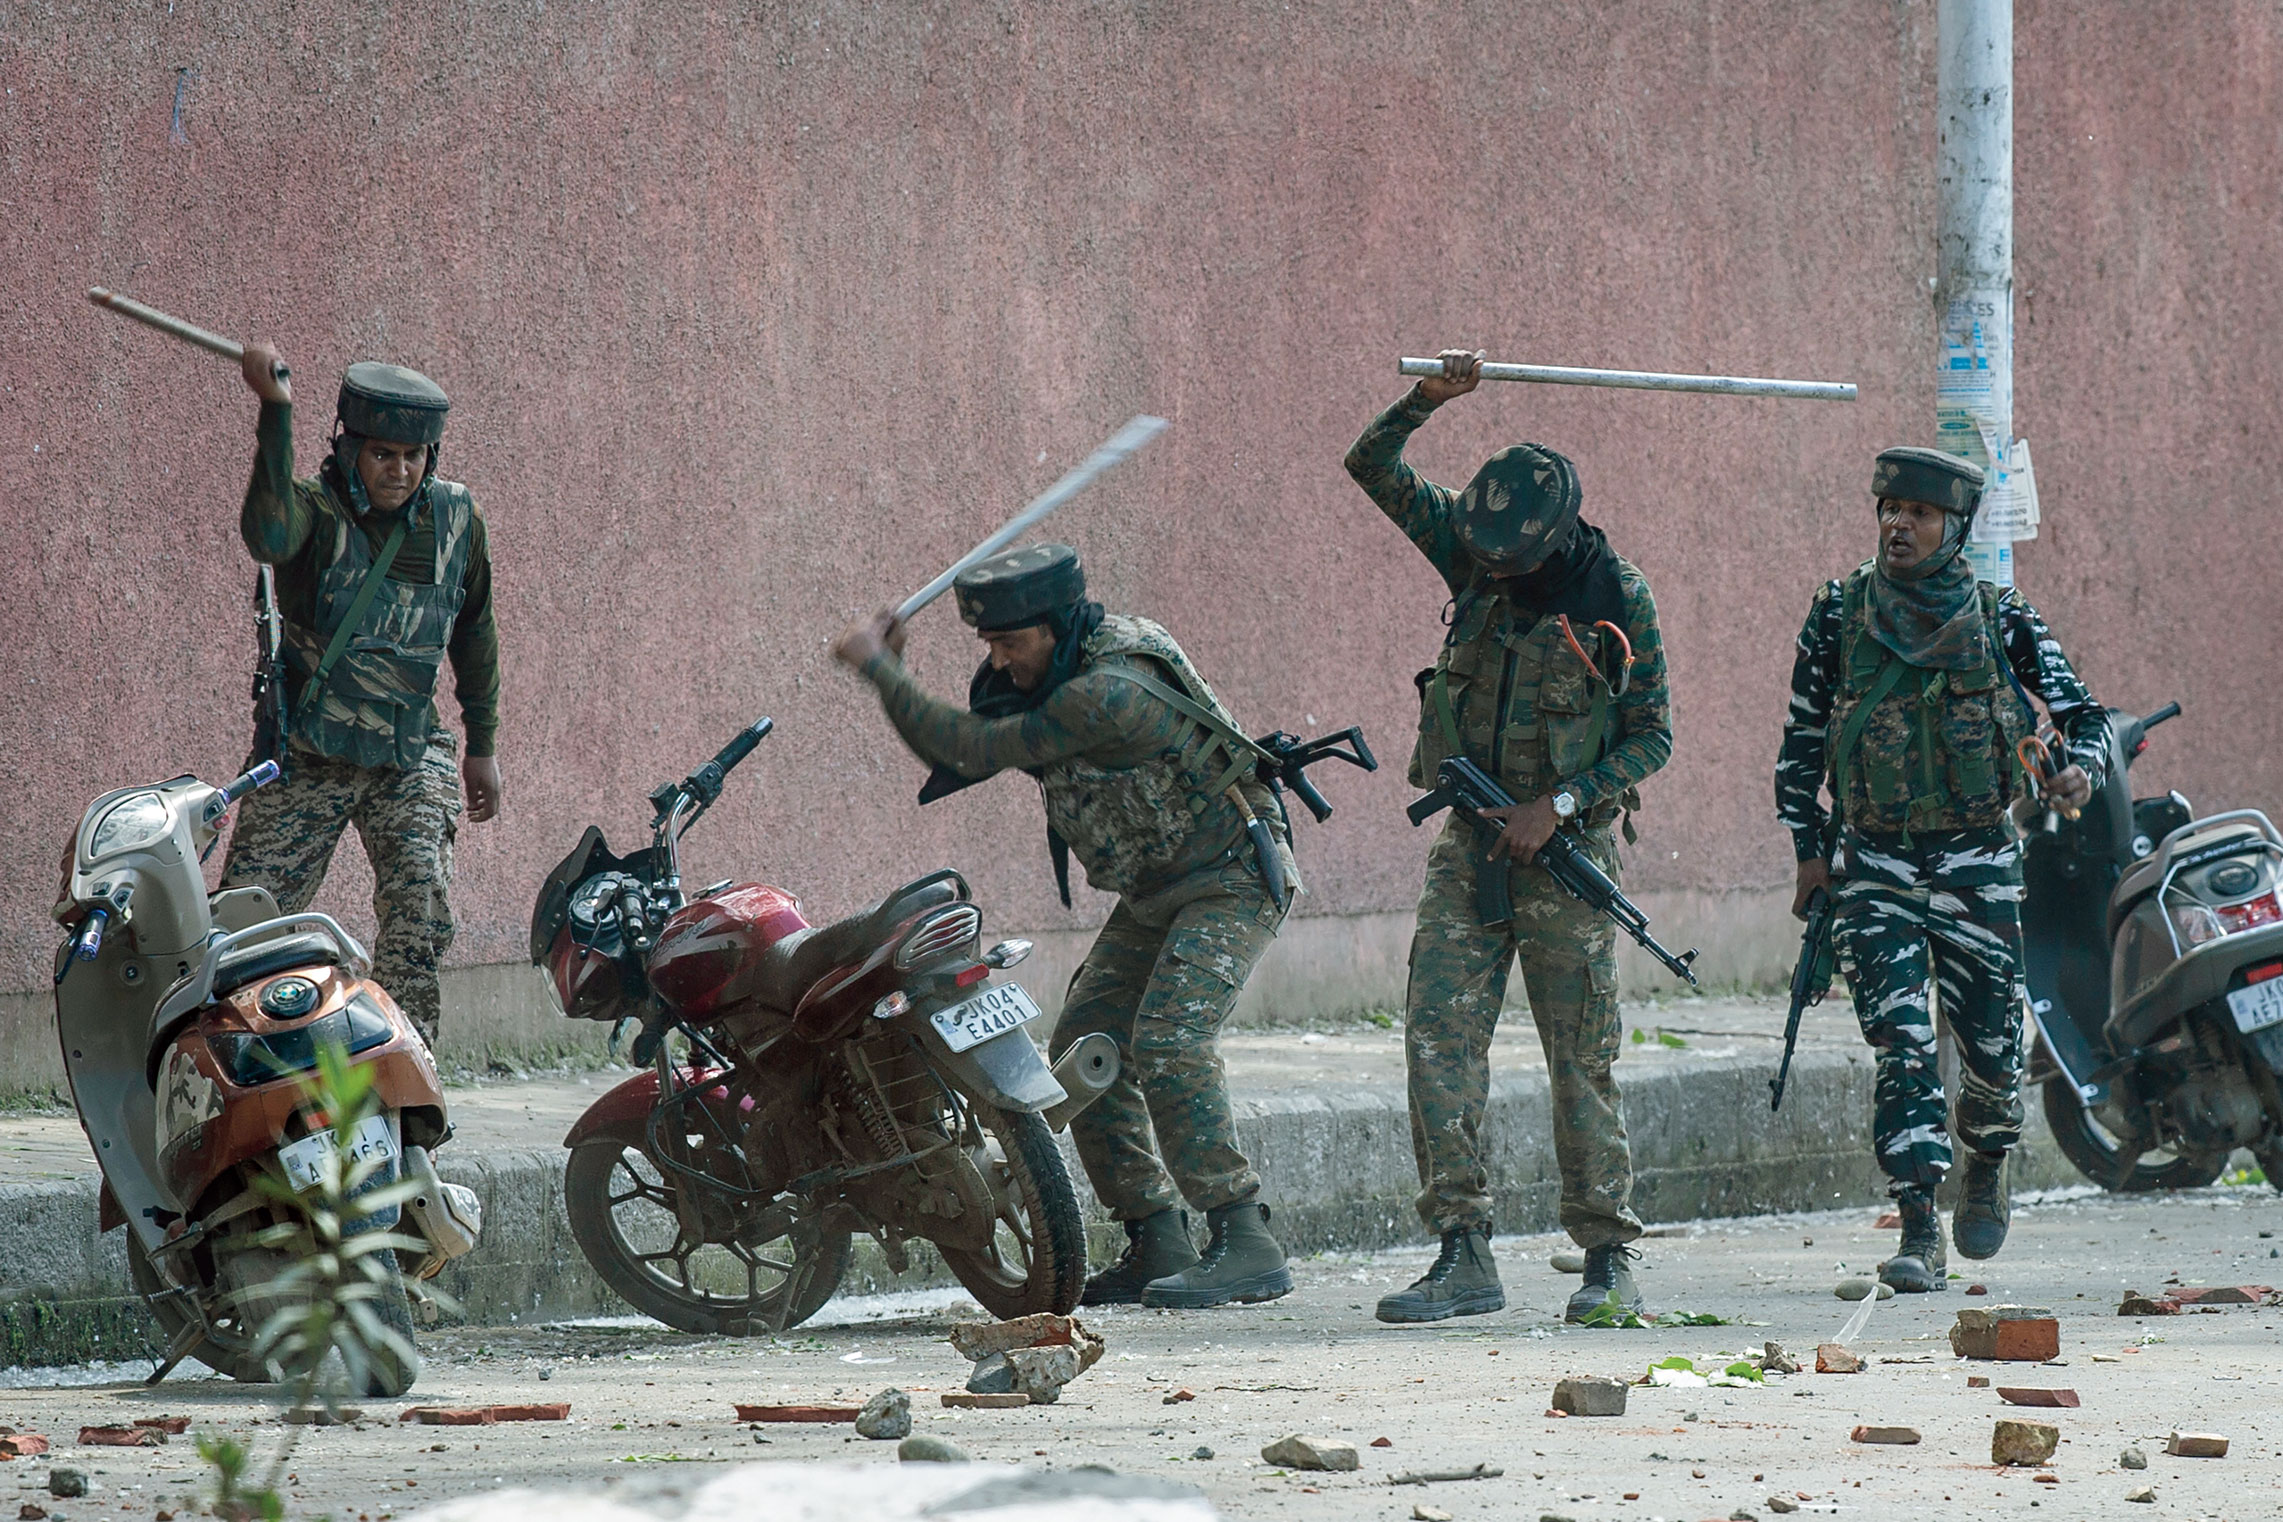 Security forces break motorbikes parked outside a college in Srinagar on May 14, 2019, as students protested against the alleged rape of a child.